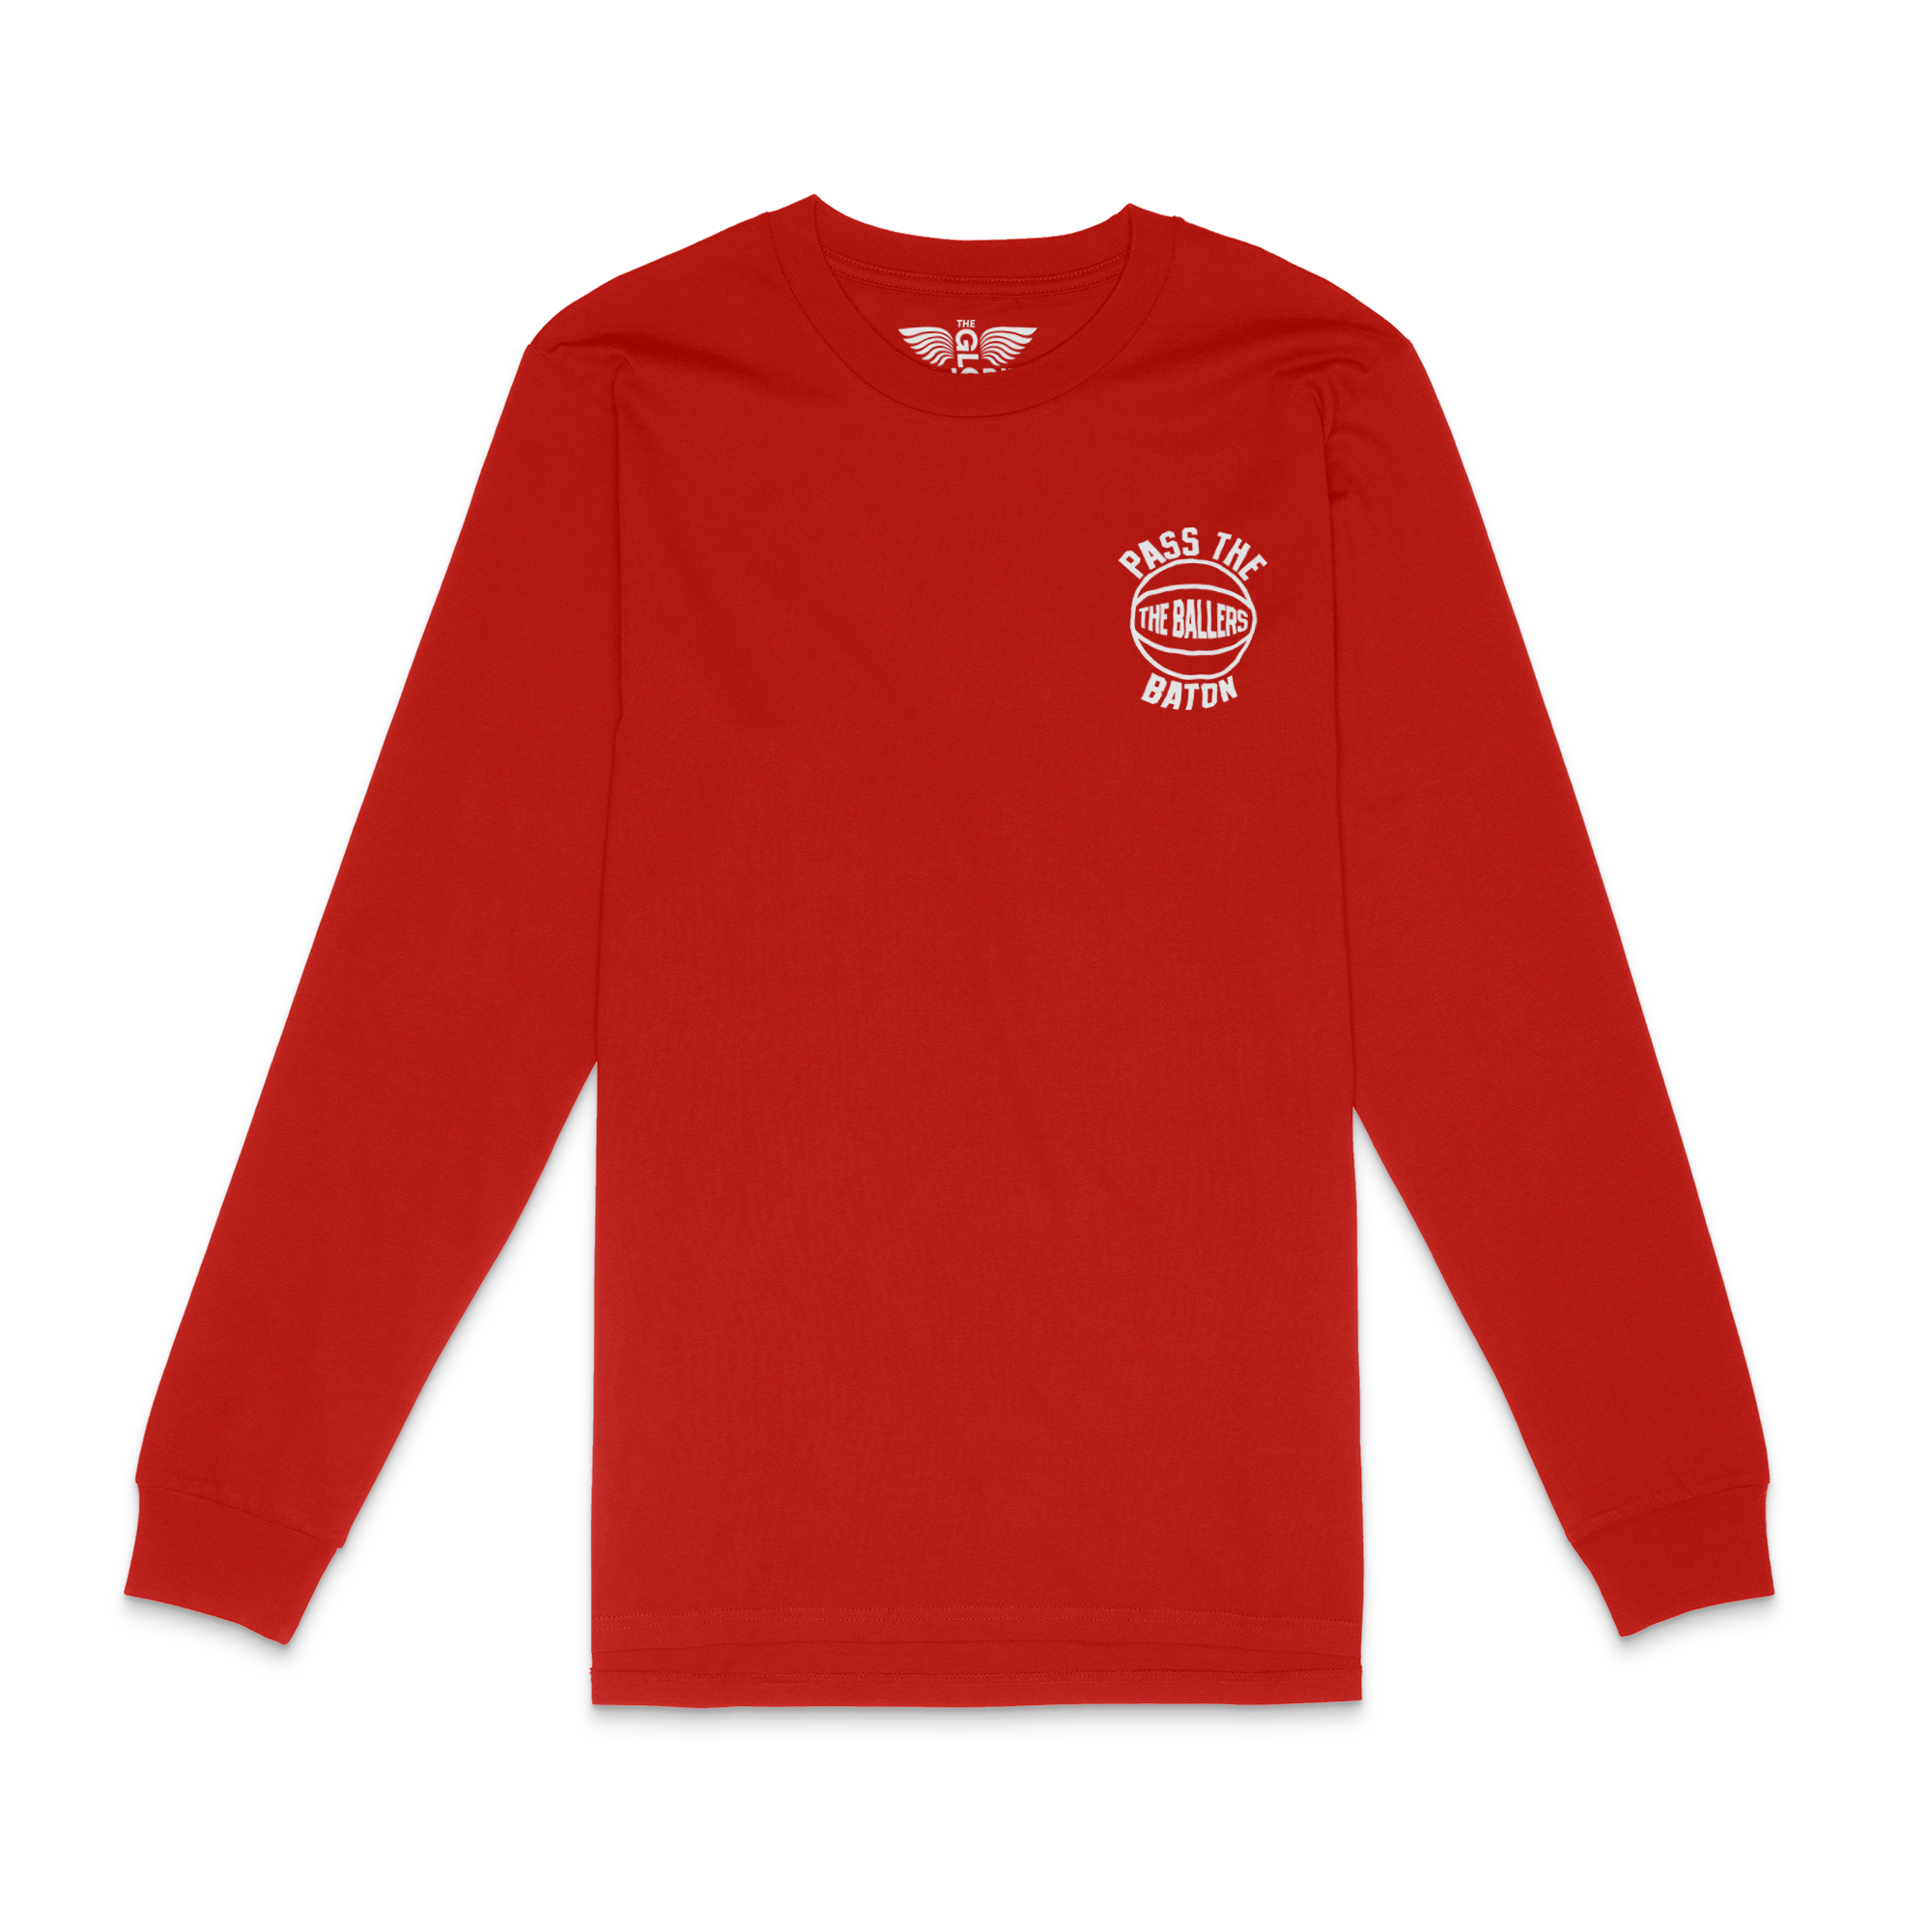 The Ballers Red Long Sleeve Tee